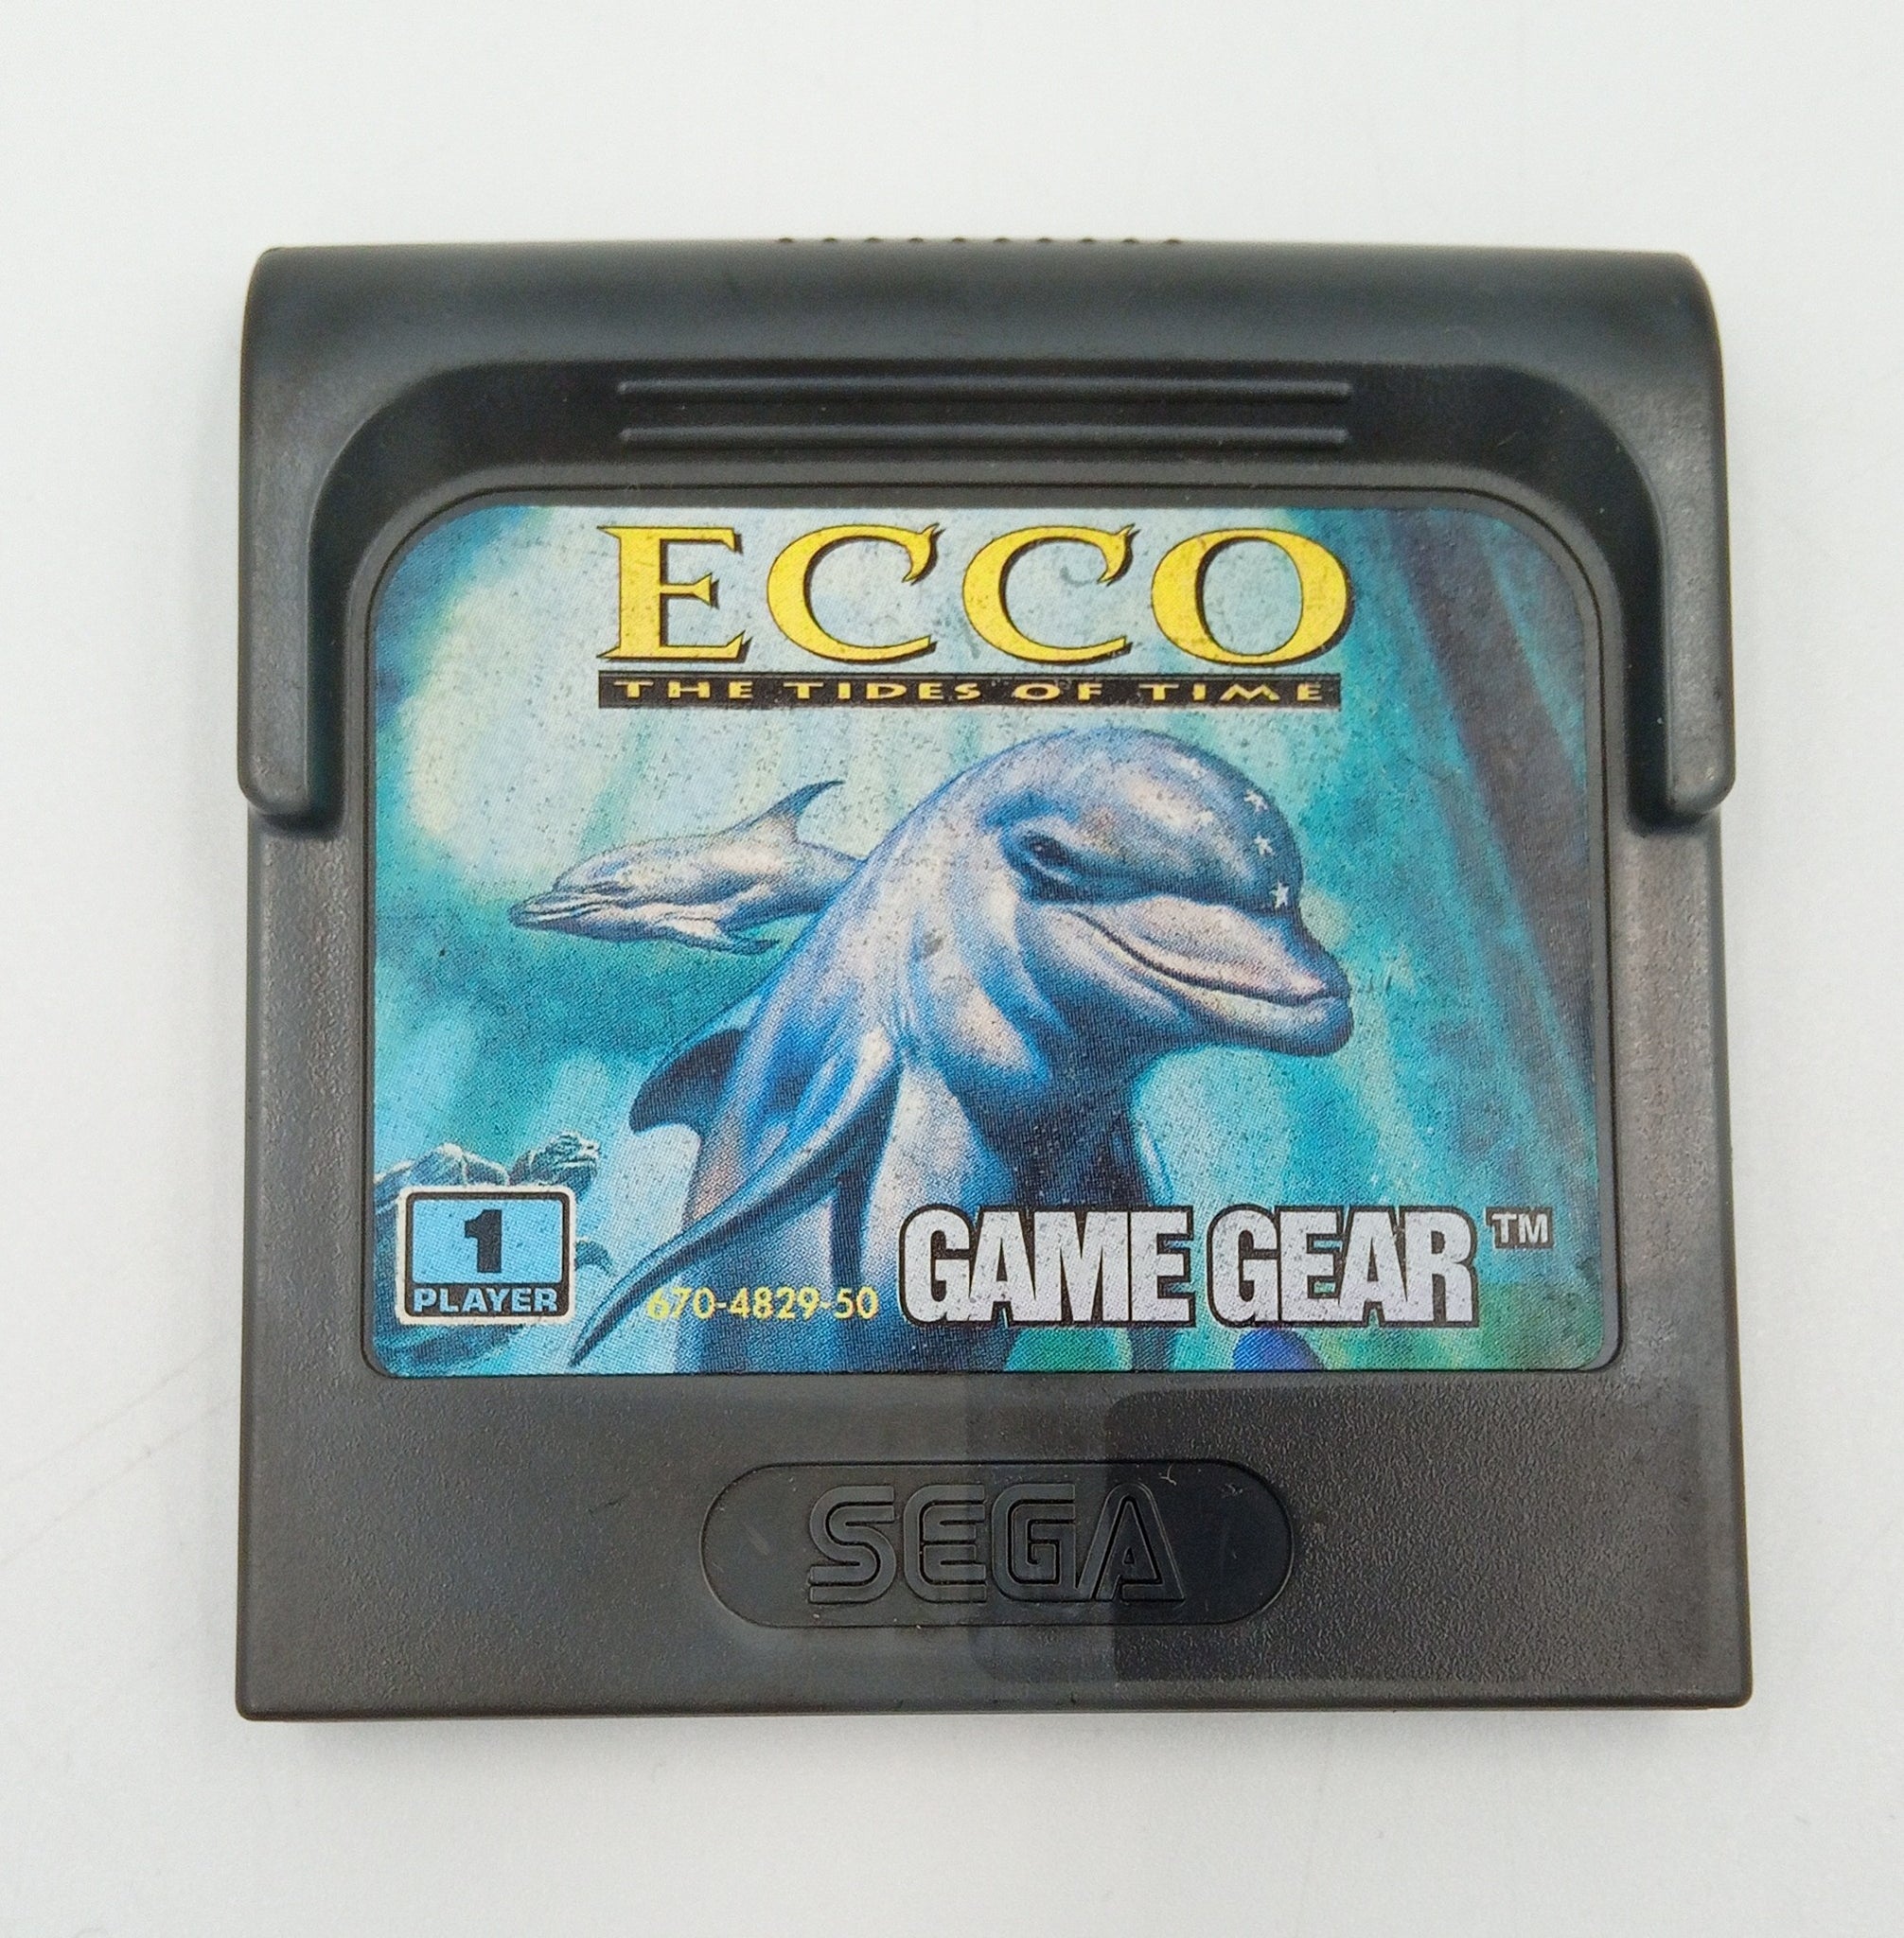 ECCO THE TIDES OF TIME GAME GEAR